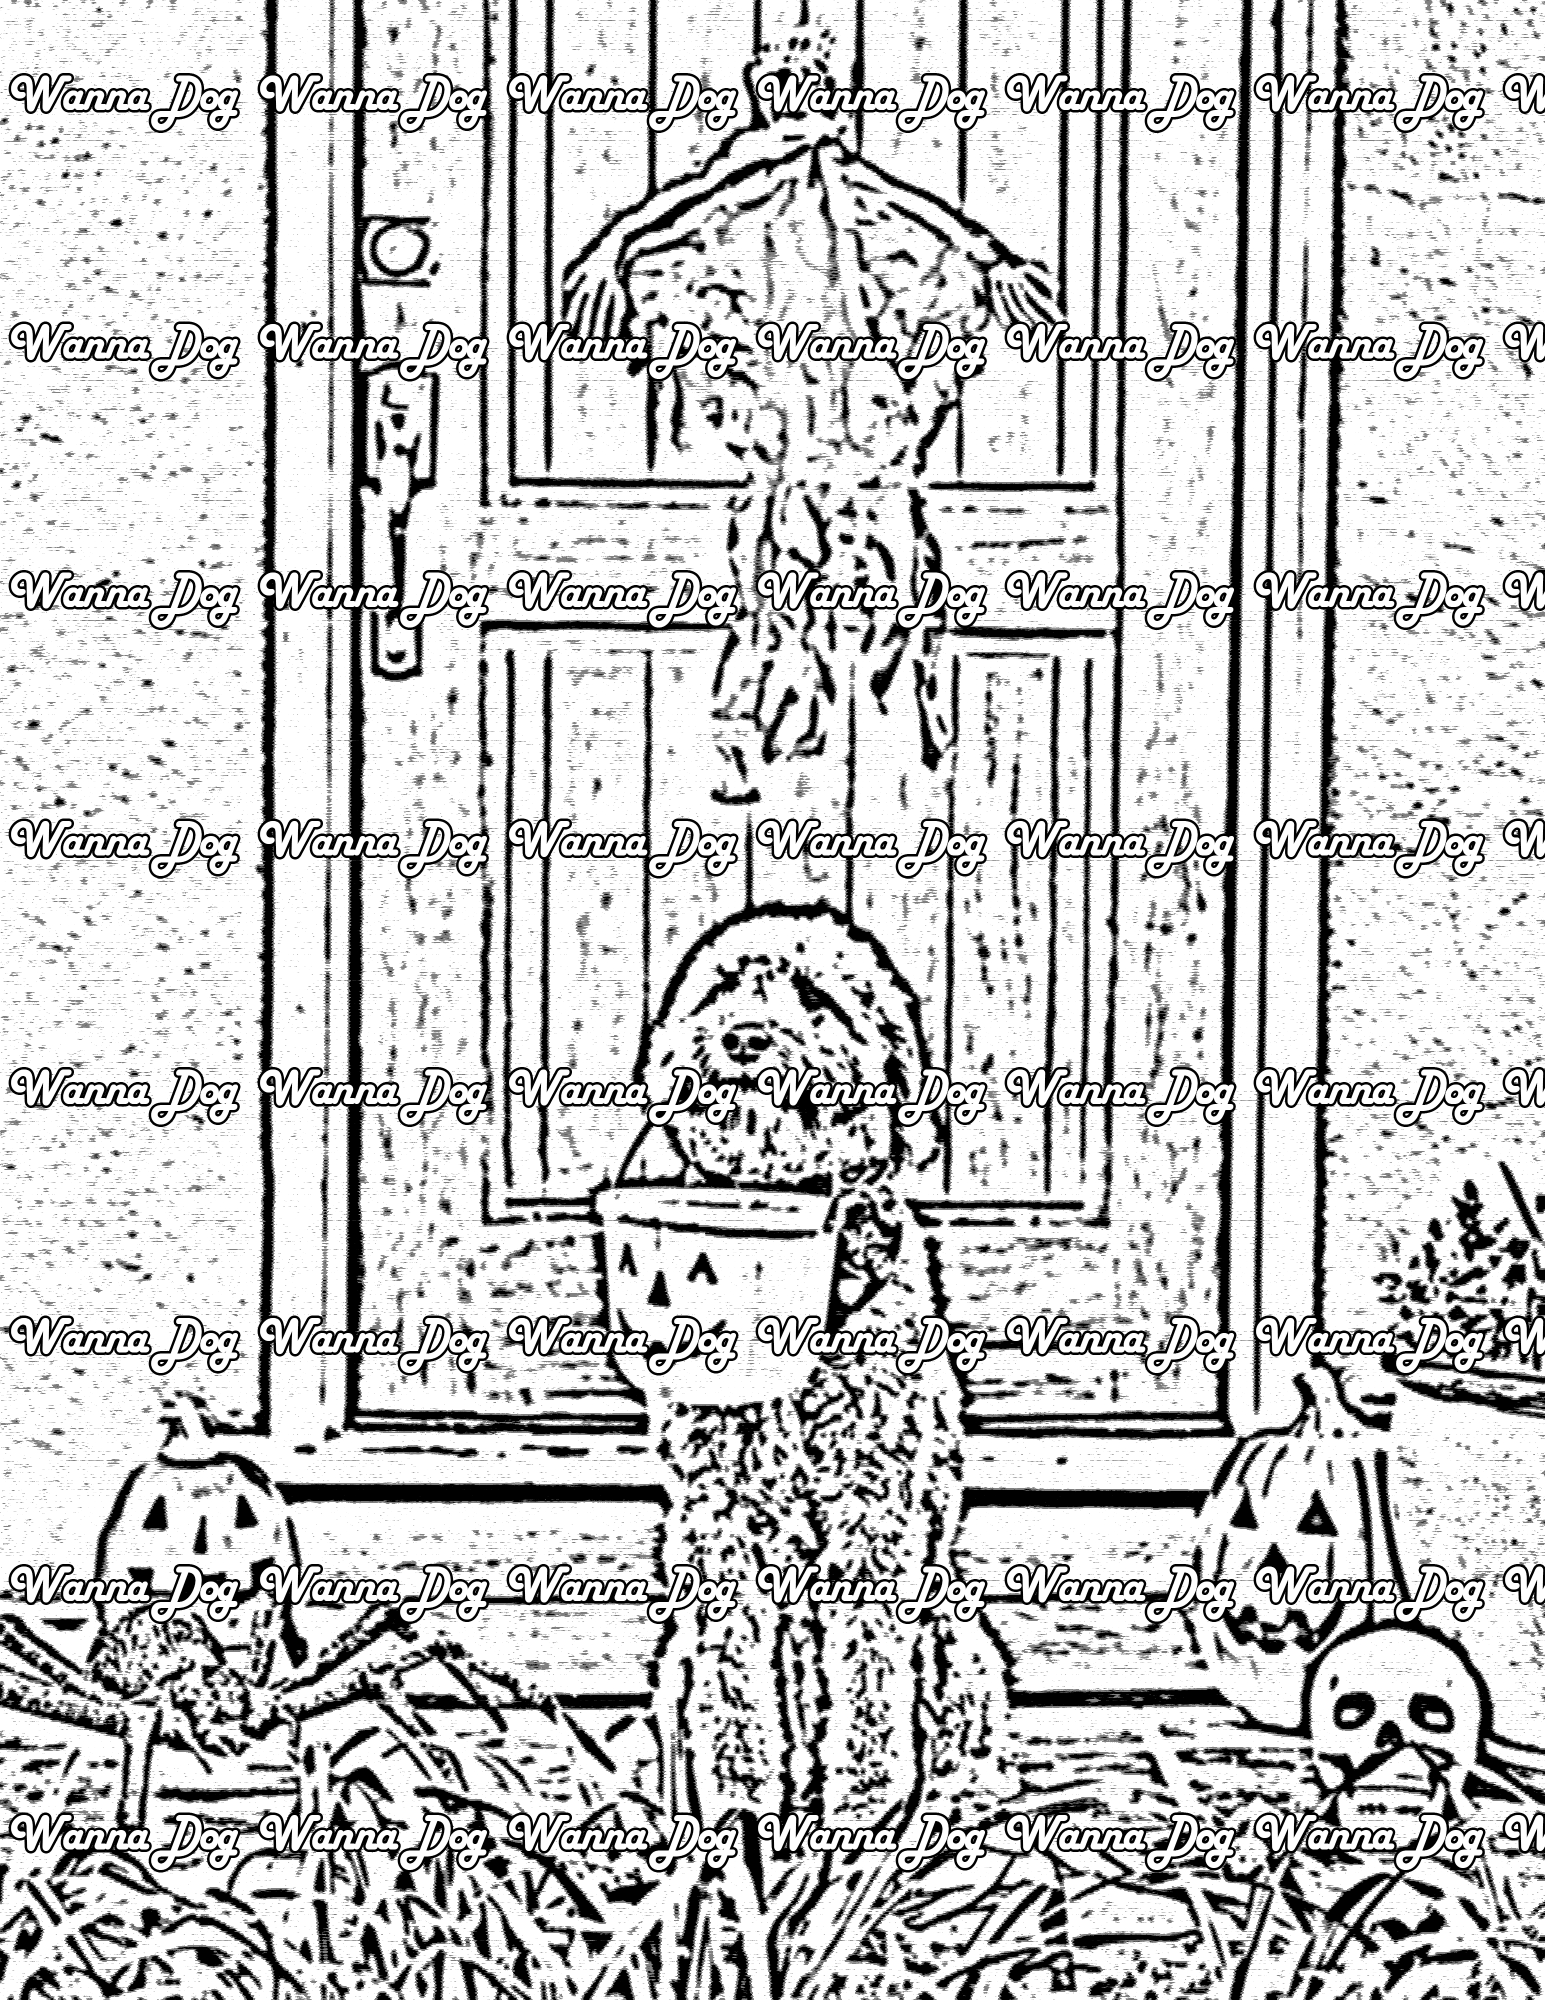 Goldendoodle Coloring Page of a Goldendoodle holding a Halloween basket in front of Halloween decorations